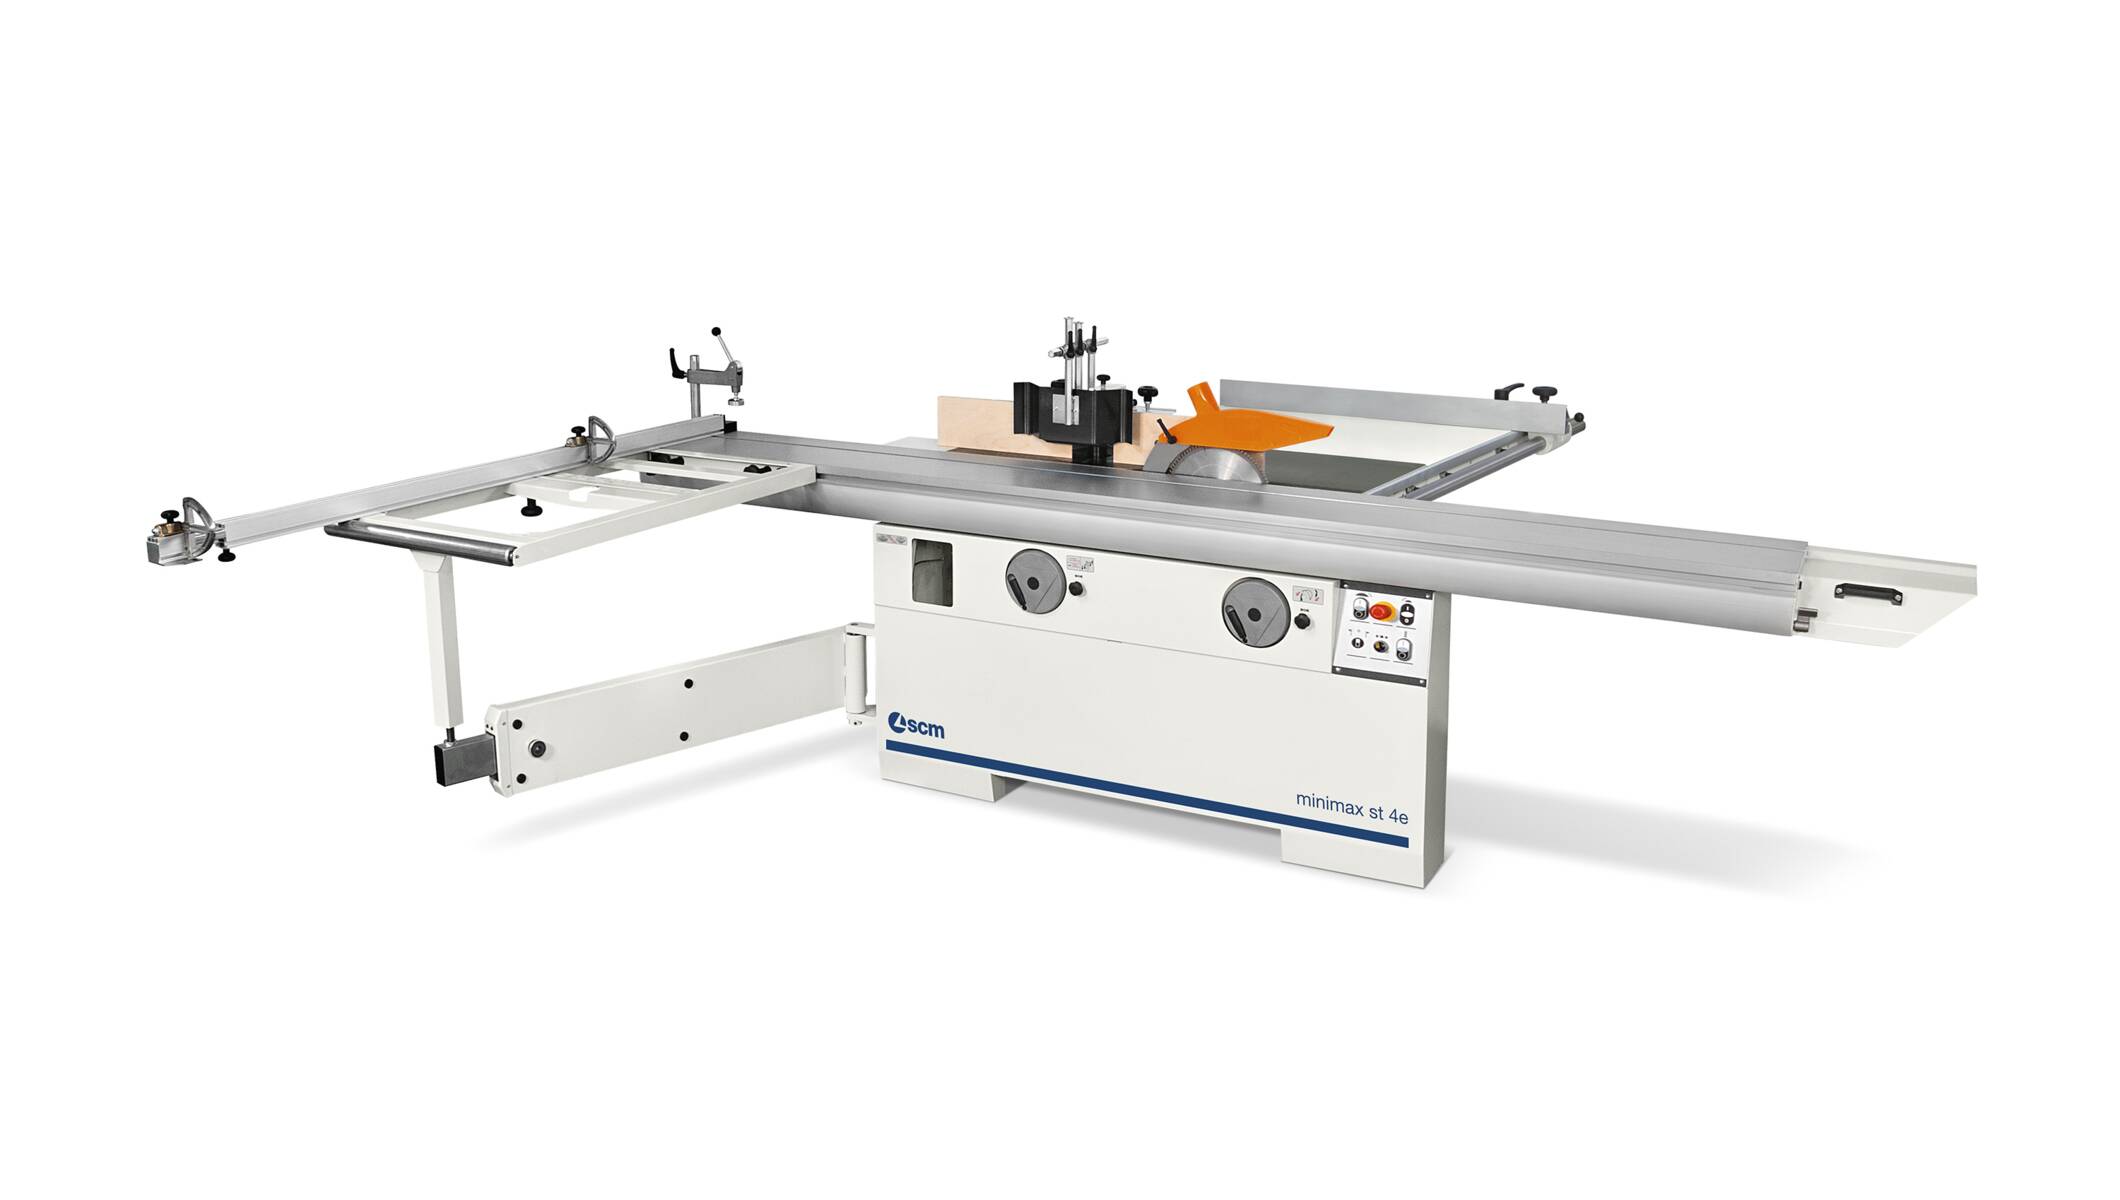 Joinery machines - Saw / shaper combination machines - minimax st 4e